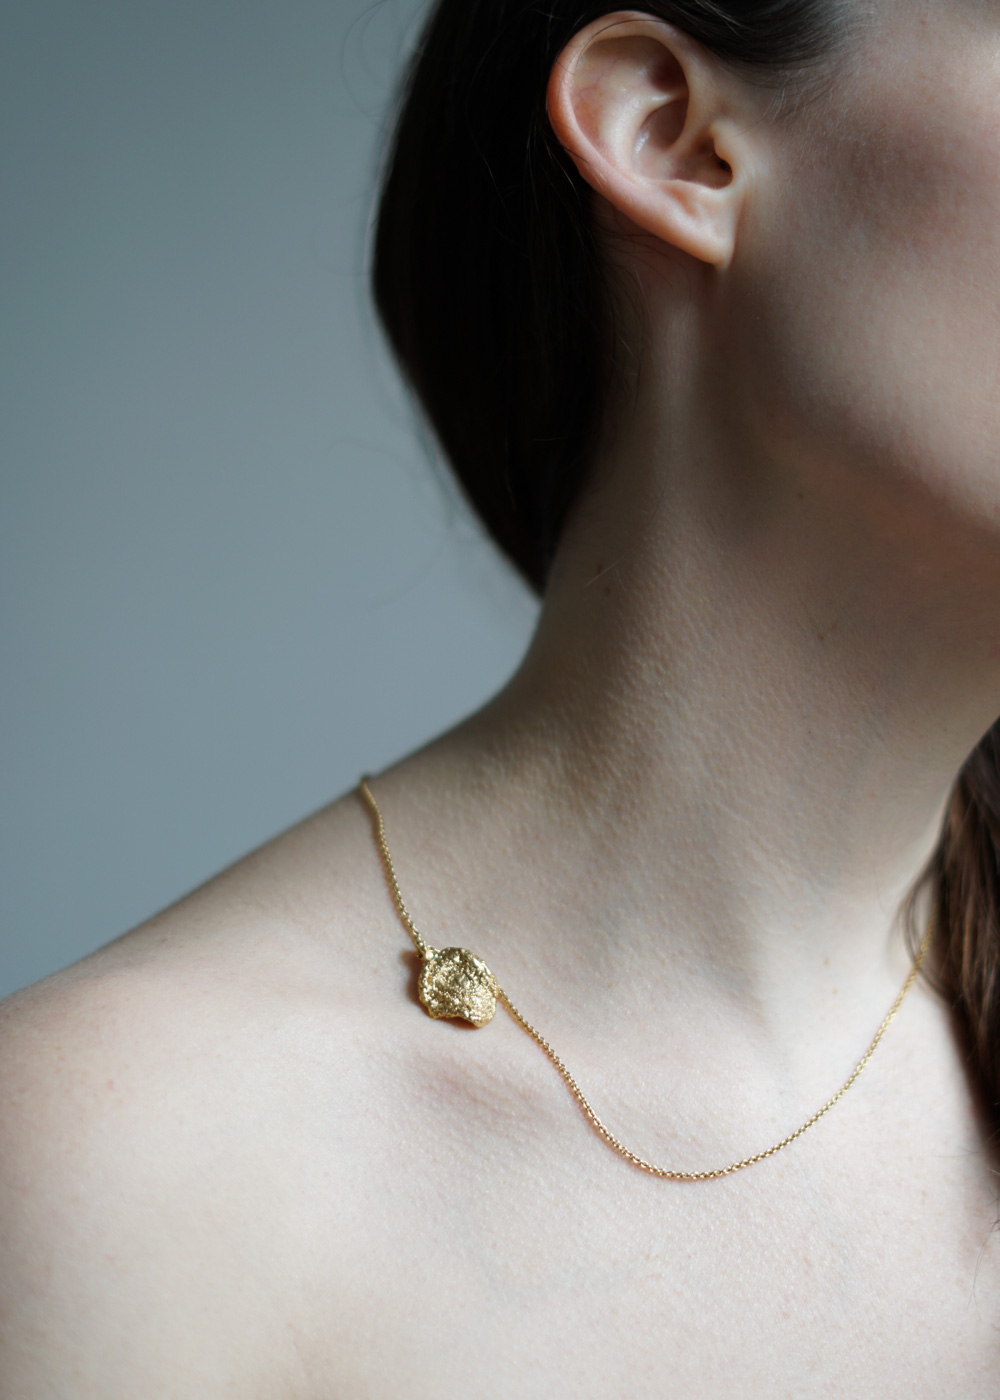 Handcrafted Gold Jewelry, Necklace Maria Sørensen, Danish Design | Fashion Style Timeless Aesthetic, Statement Golden Jewelry | RG Daily Blog